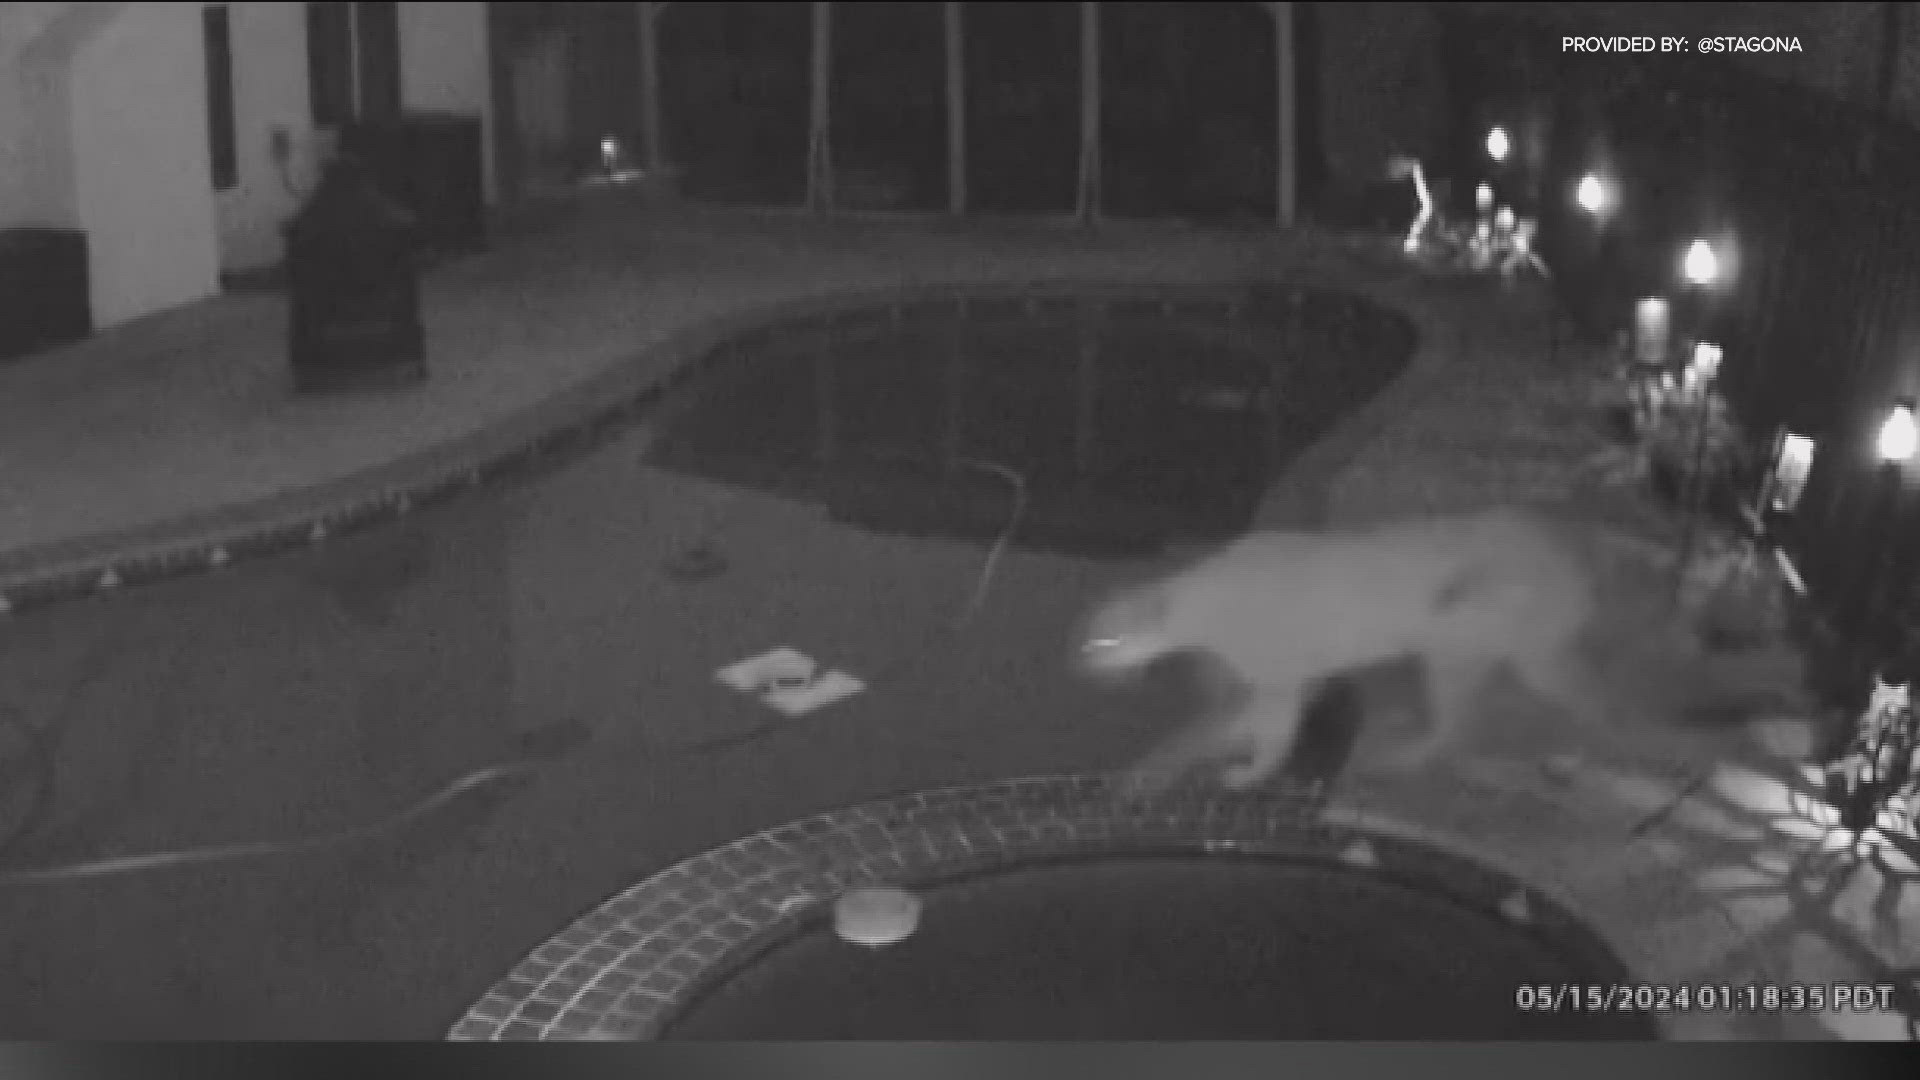 Video shows an adult mountain lion jumping the fence and strolling through the backyard pool area after midnight.